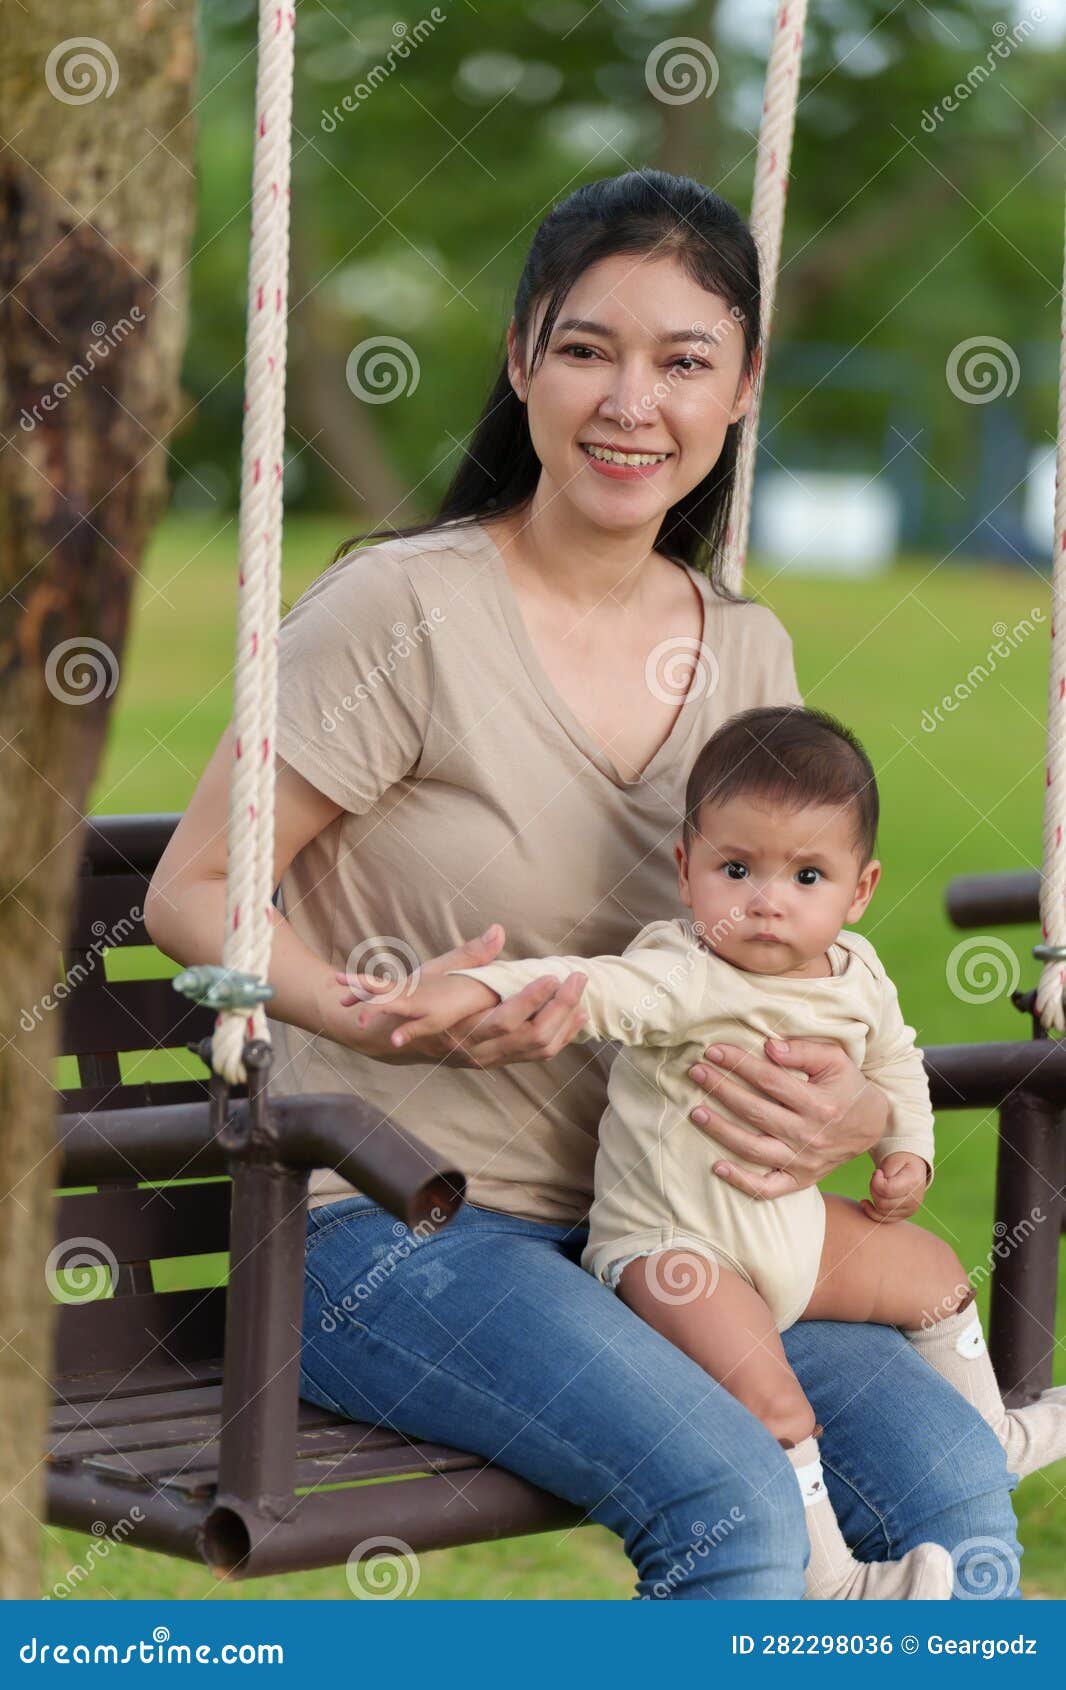 Mother with Her Baby Sitting on a Swing in Park Stock Photo - Image of ...